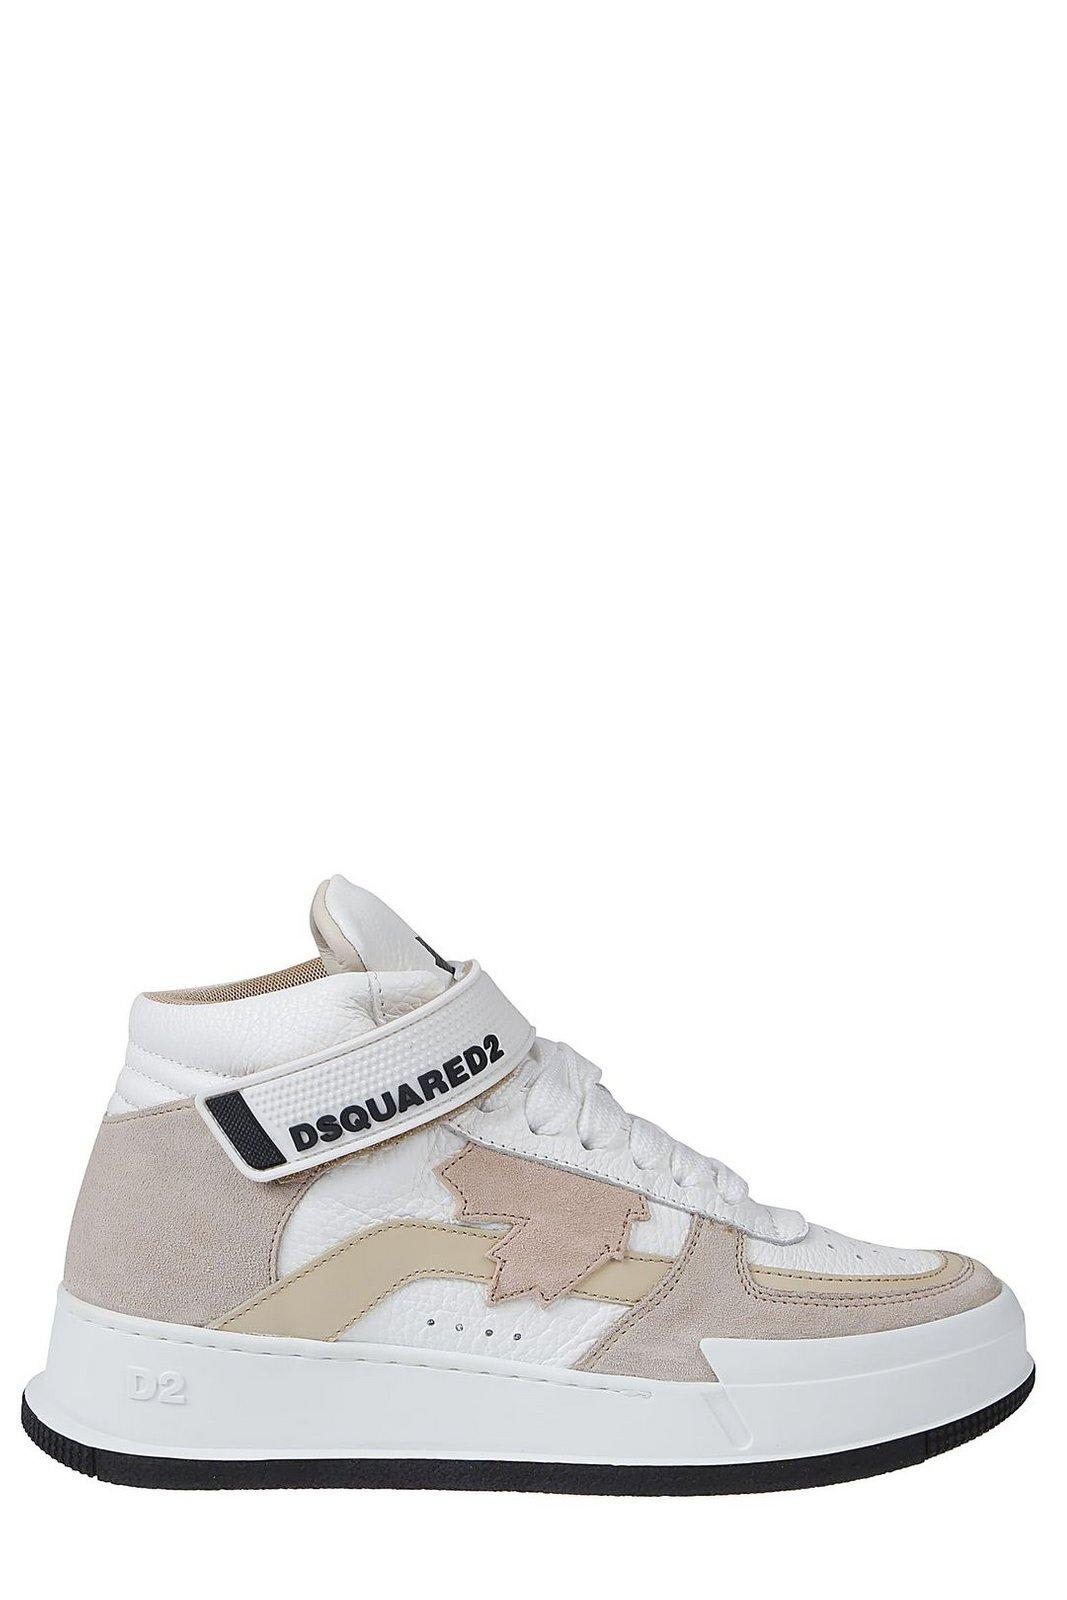 Dsquared2 Logo Printed High-top Sneakers